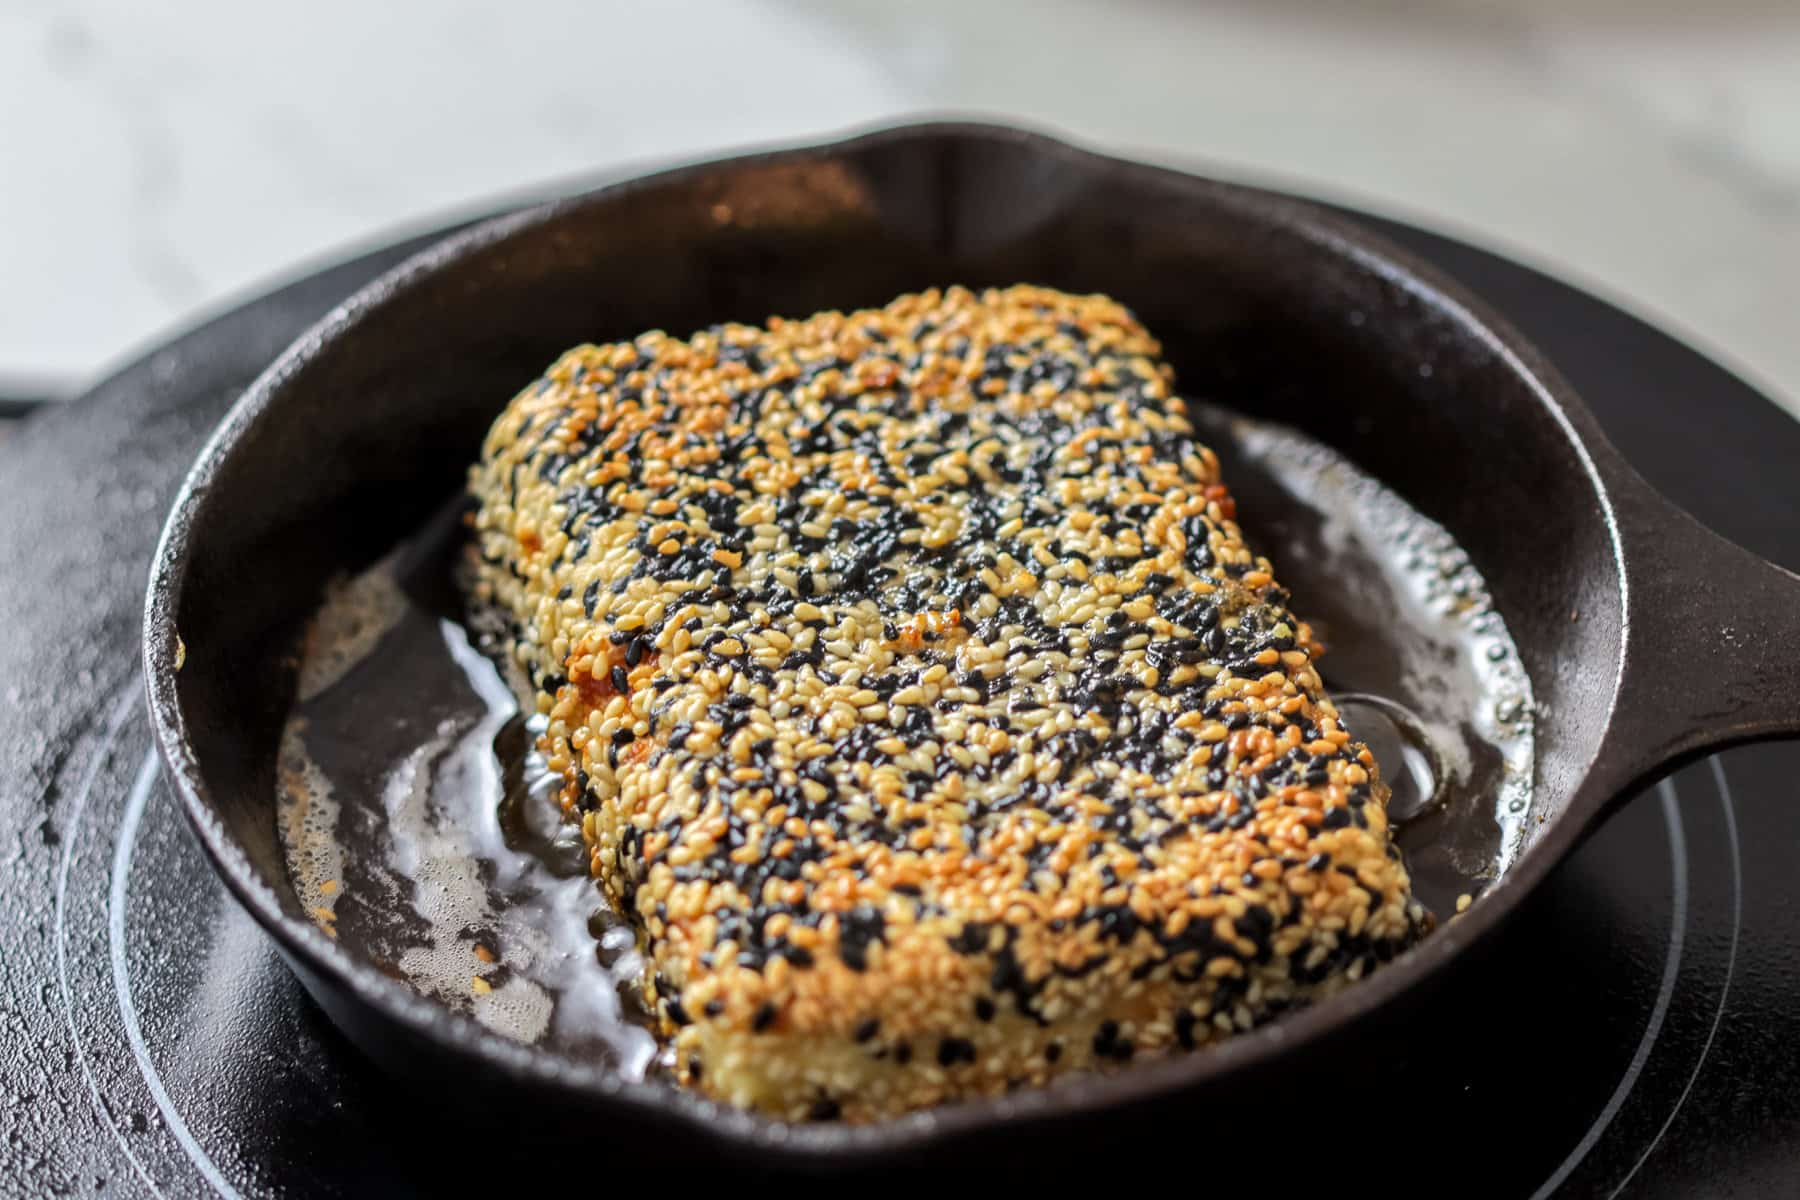 Fried feta cheese with sesame seeds in a cast iron skillet.